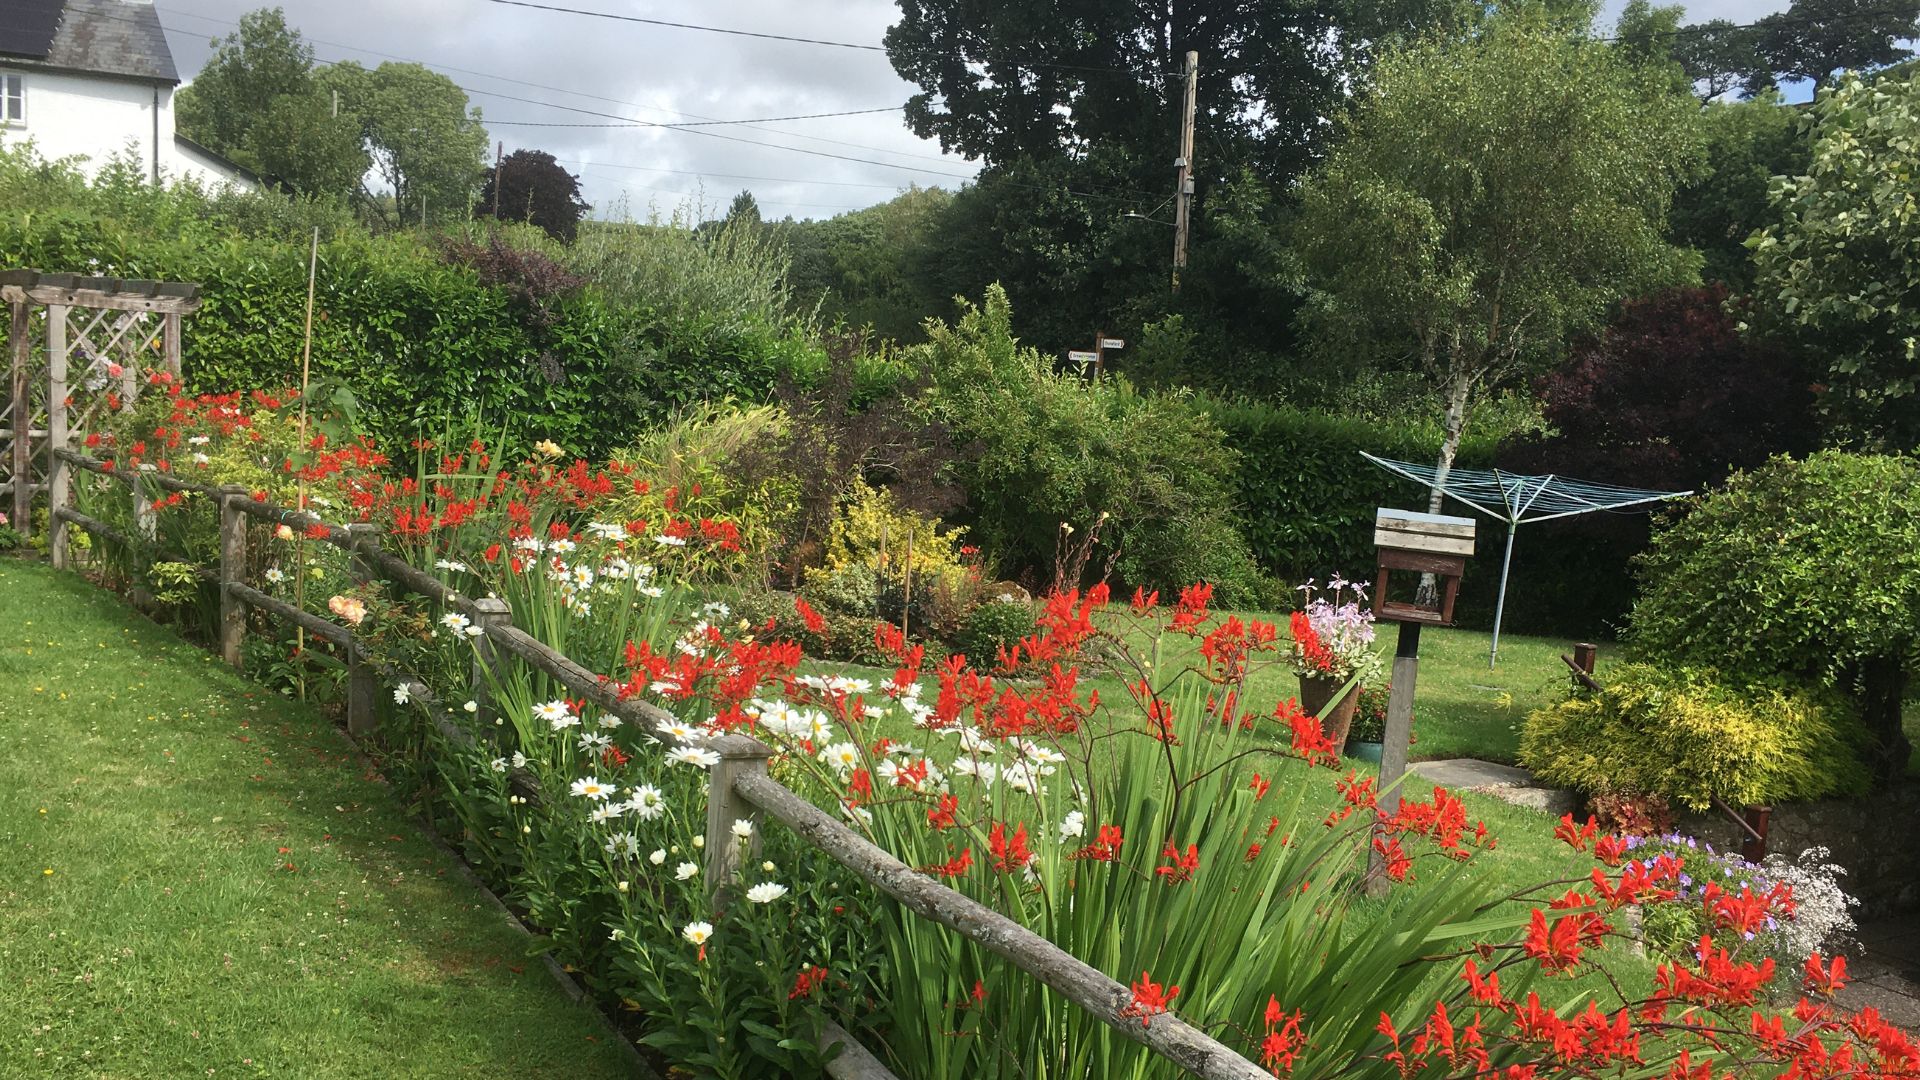 The Old Forge, Dunsford – Open Gardens